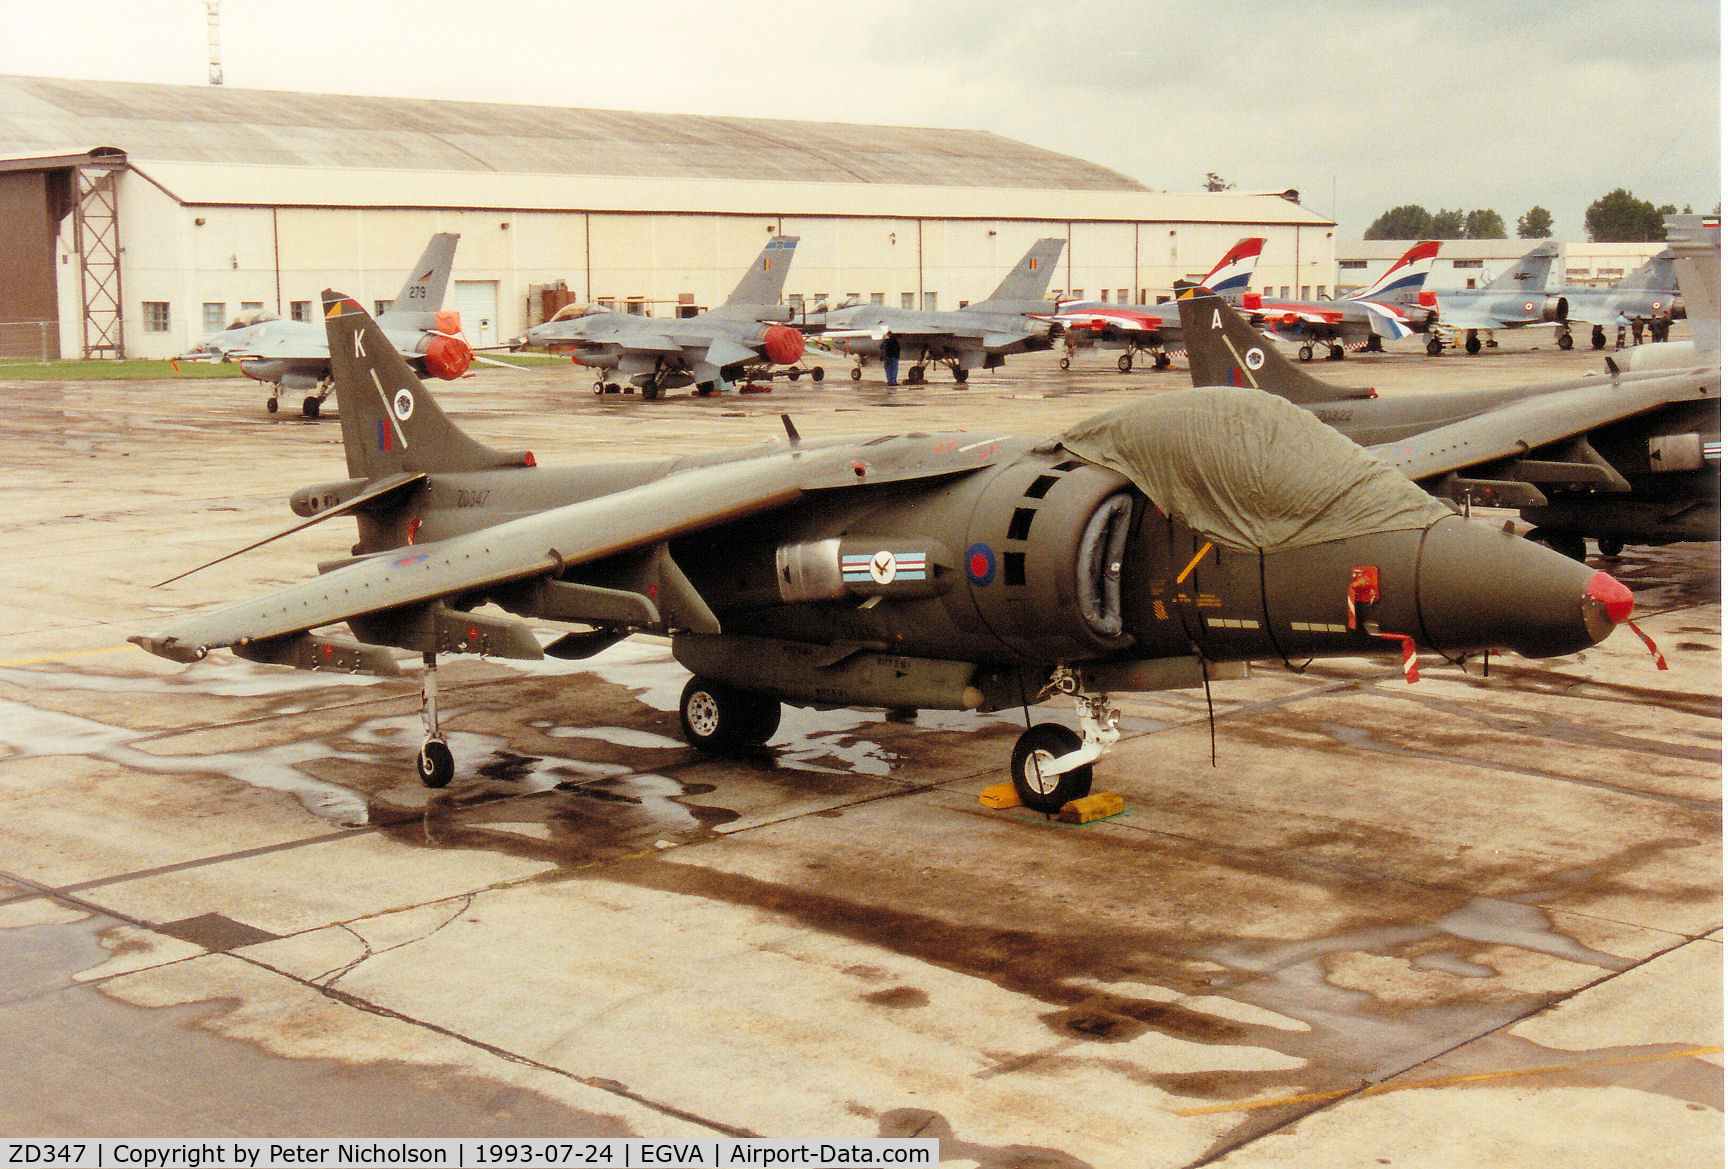 ZD347, 1988 British Aerospace Harrier GR.5 C/N P14, Harrier GR.5, callsign Wildcat 2, of 20[Reserve] Squadron at RAF Wittering on the flight-line at the 1993 Intnl Air Tattoo at RAF Fairford.